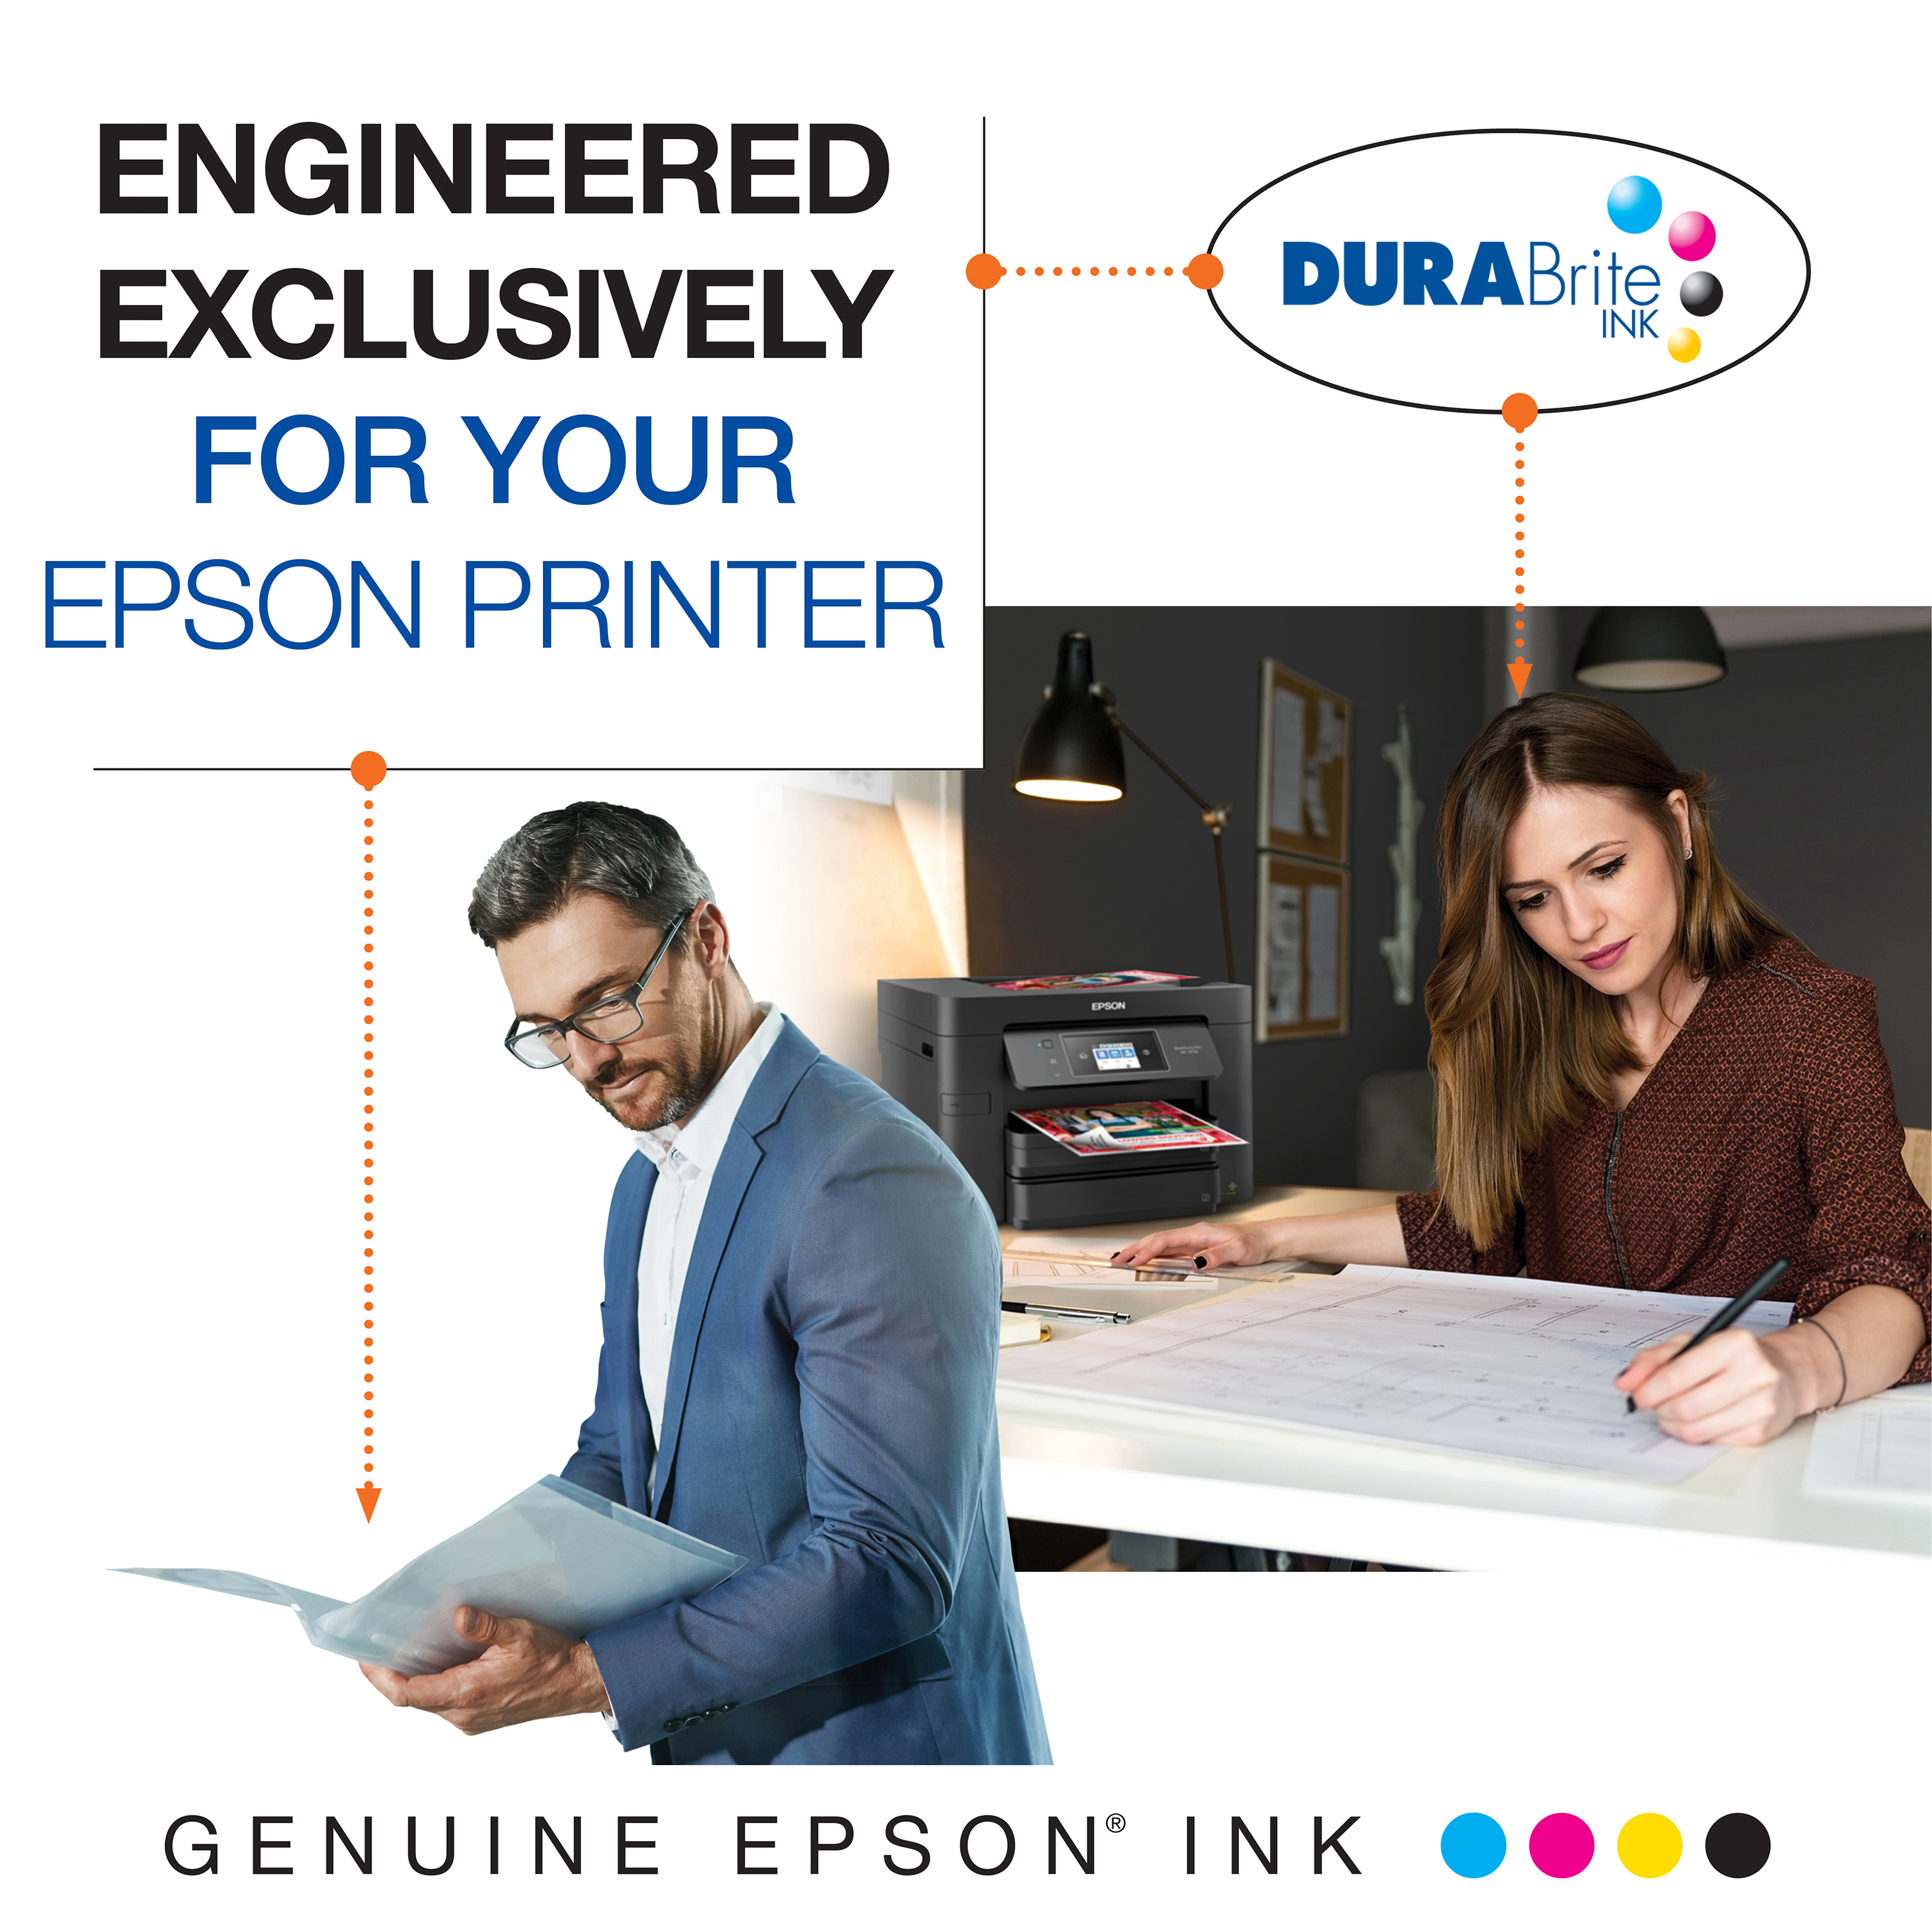 EPSON 702 DURABrite Ultra Ink High Capacity Black & Standard Color Cartridge Combo Pack (T702XL-BCS) Works with WorkForce Pro WF-3720, WF-3730, WF-3733 - image 5 of 5